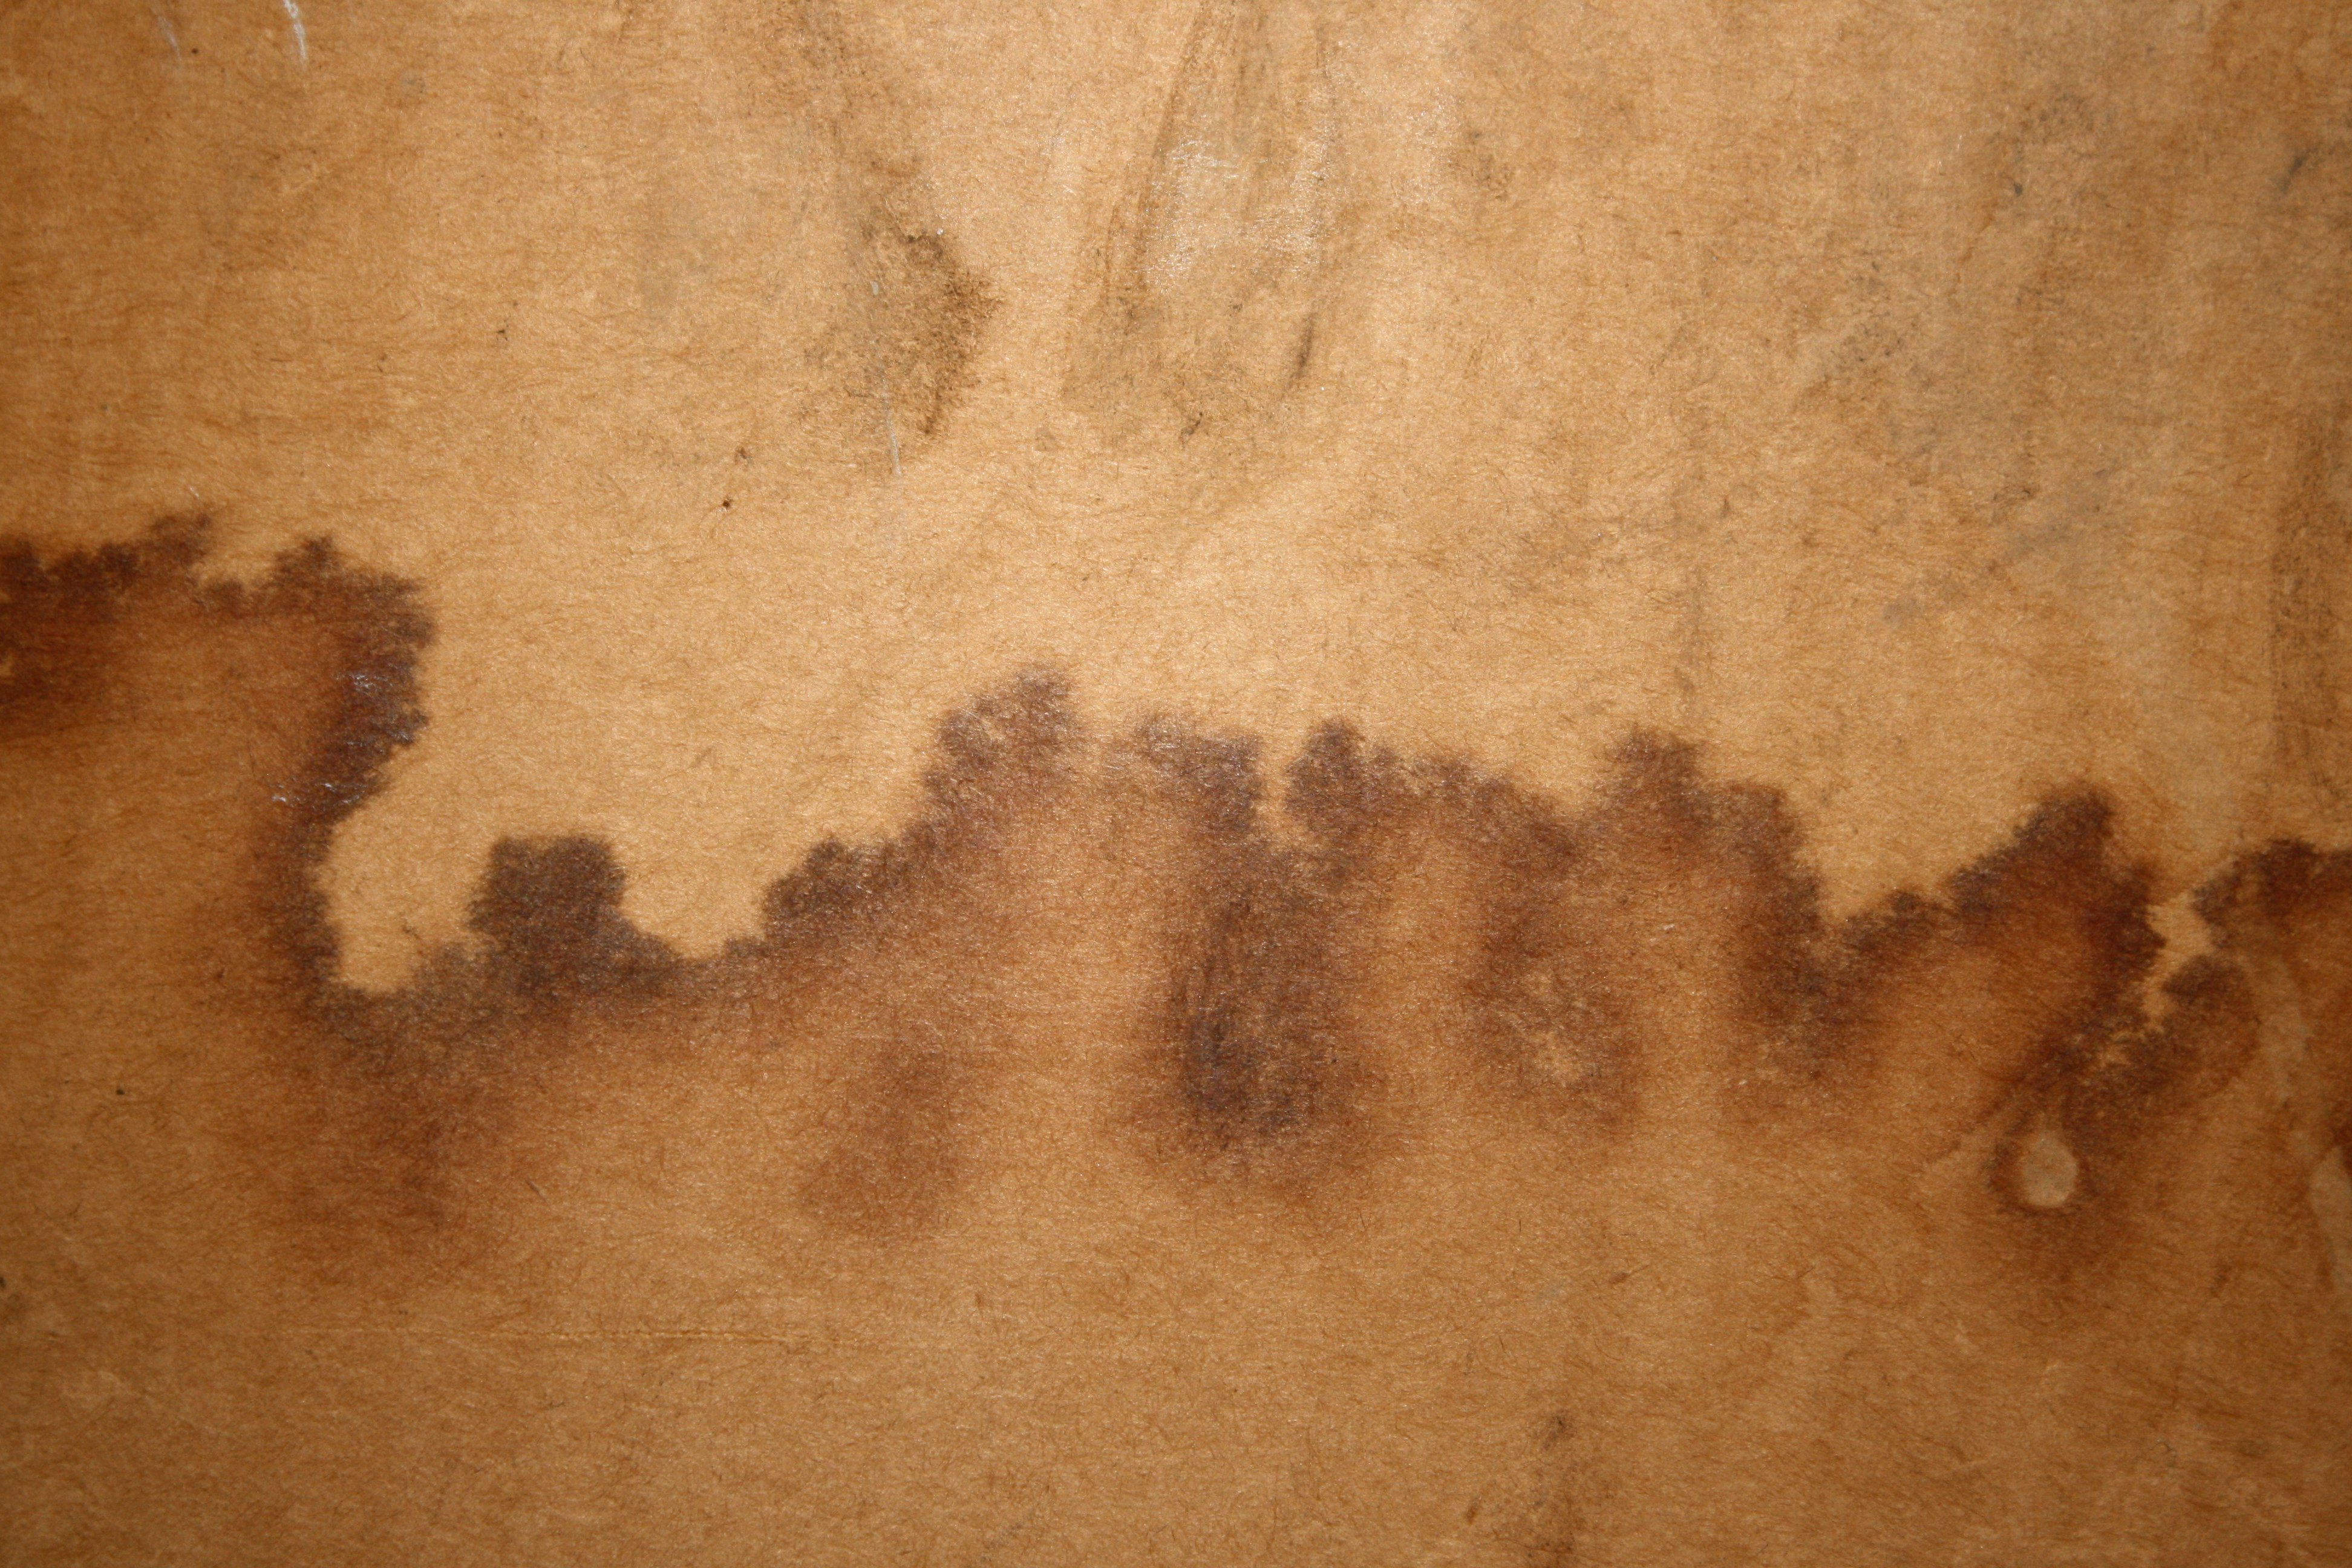 Water Stains on Cardboard Texture Picture | Free Photograph | Photos ...